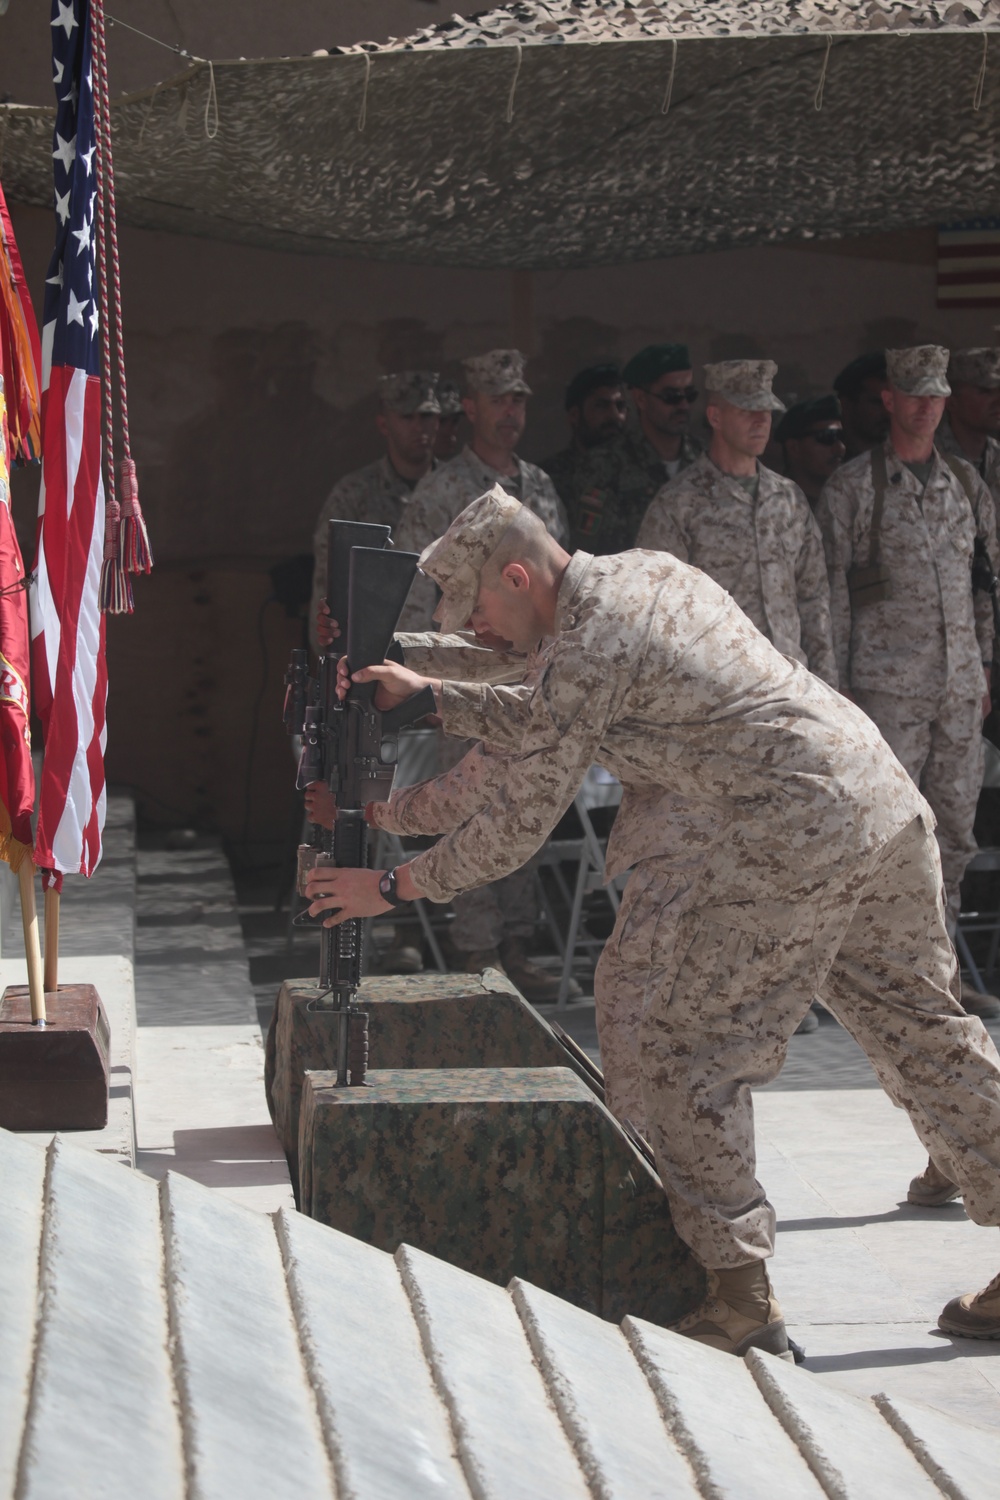 Heroes Remembered in Sangin